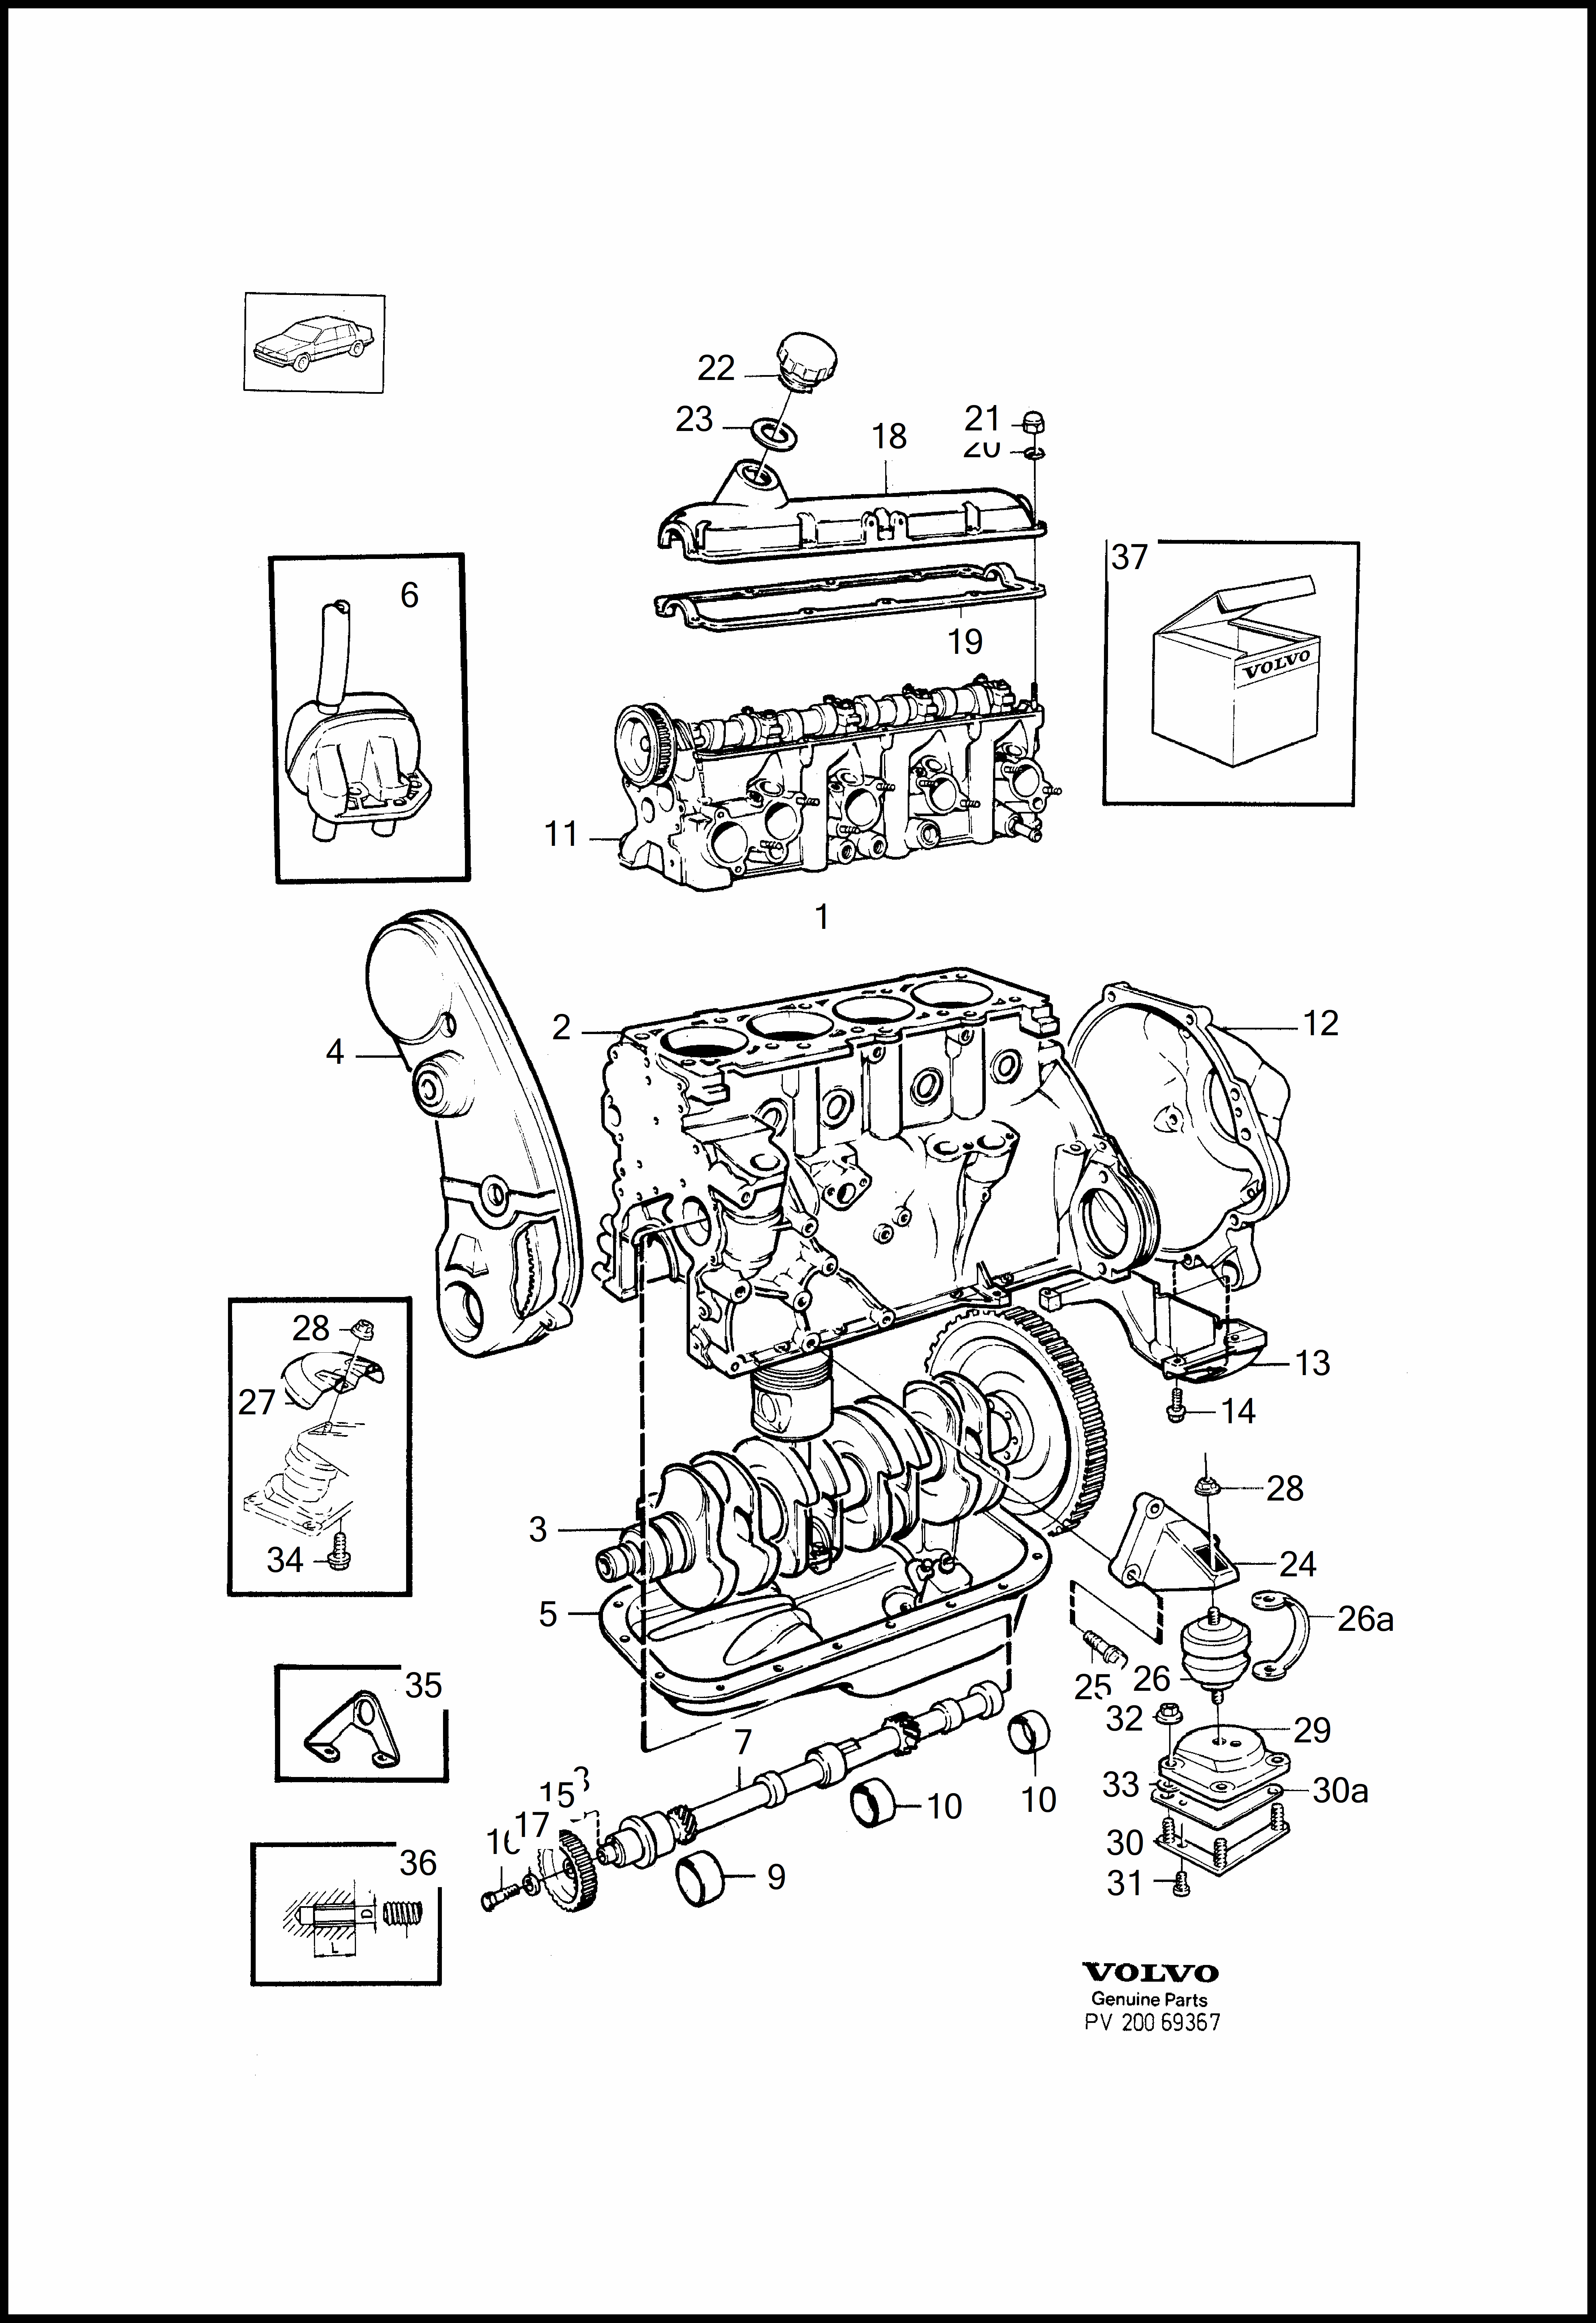 engine with fittings for Volvo 760 760